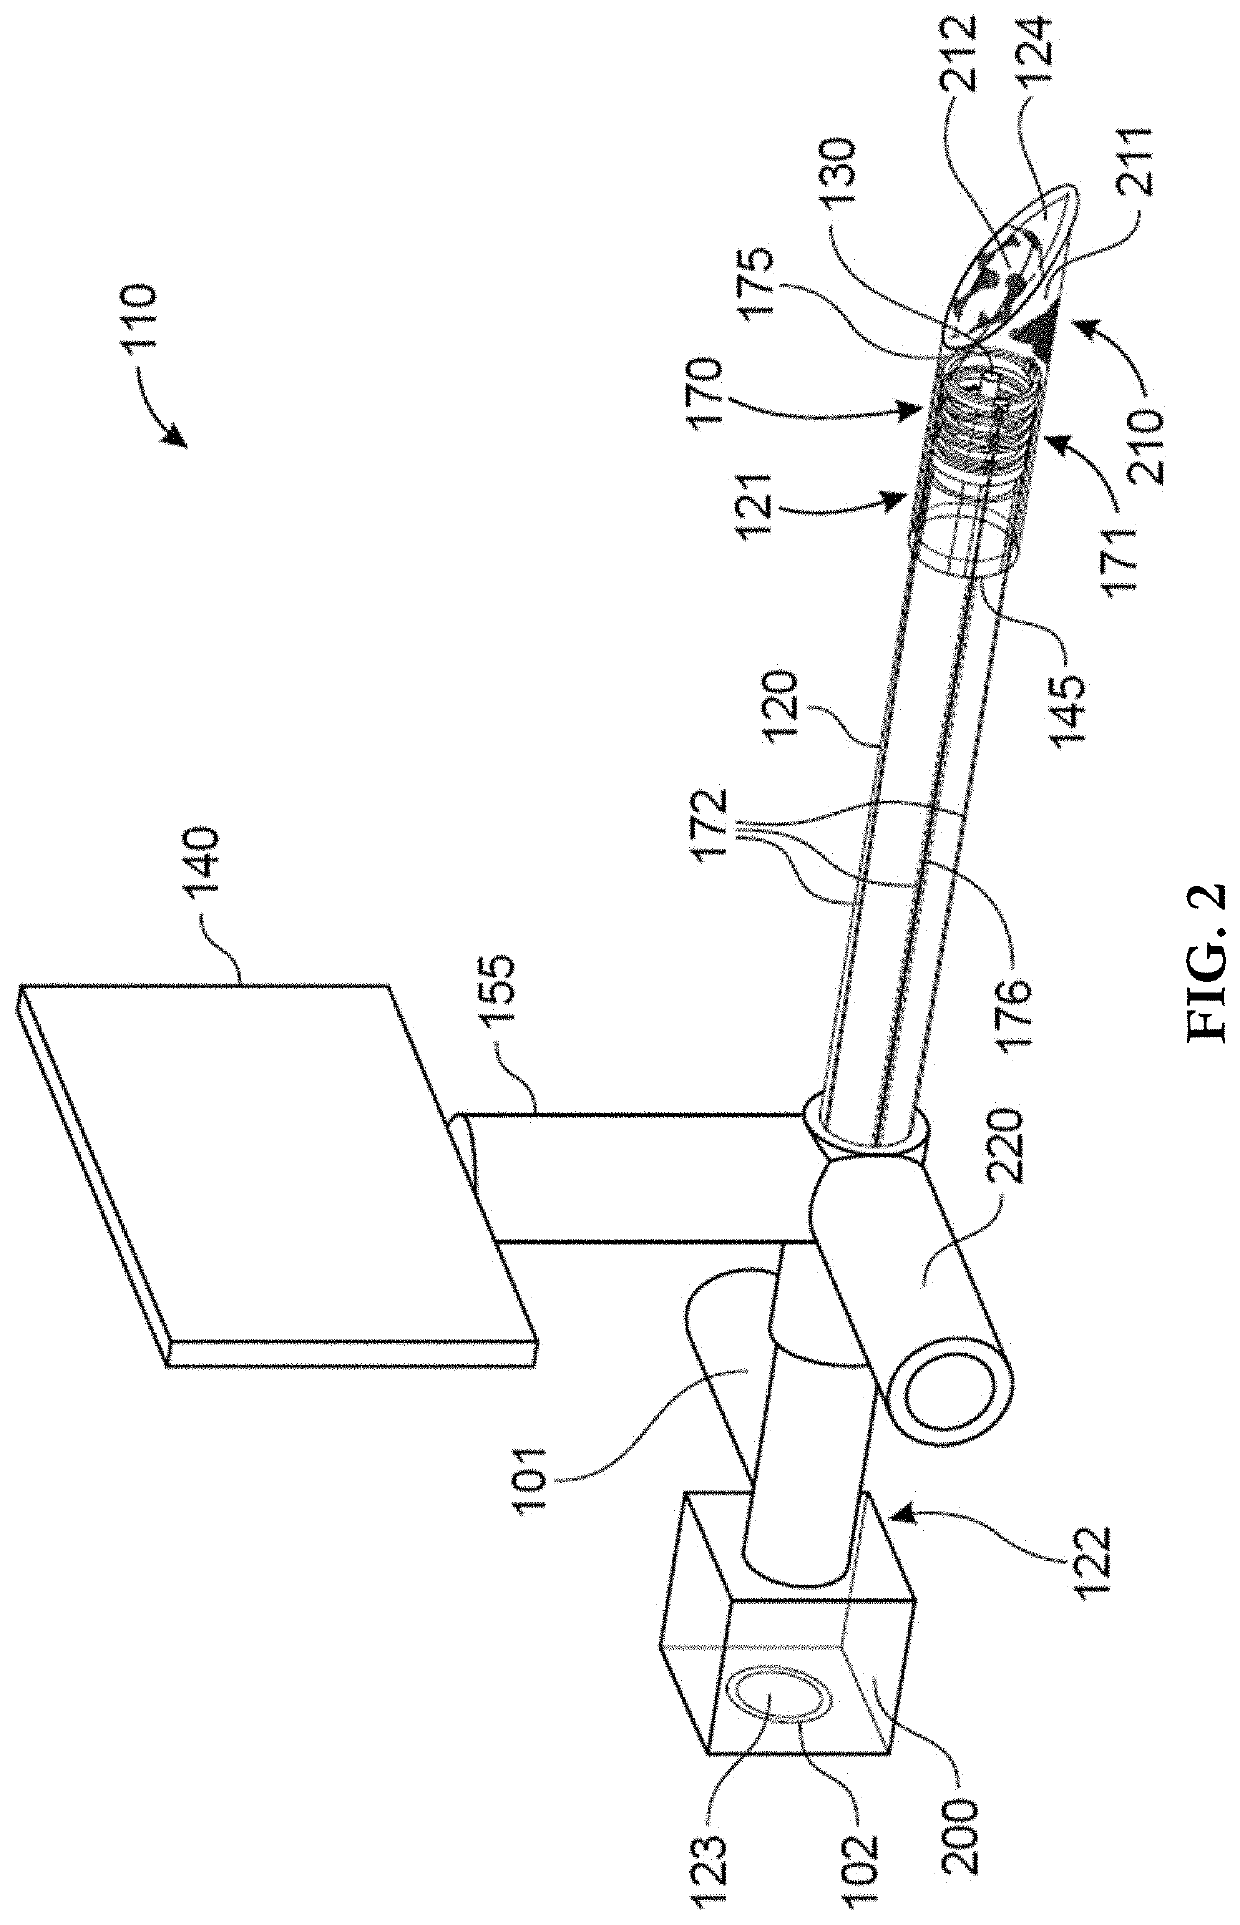 Intubation system, method, and device